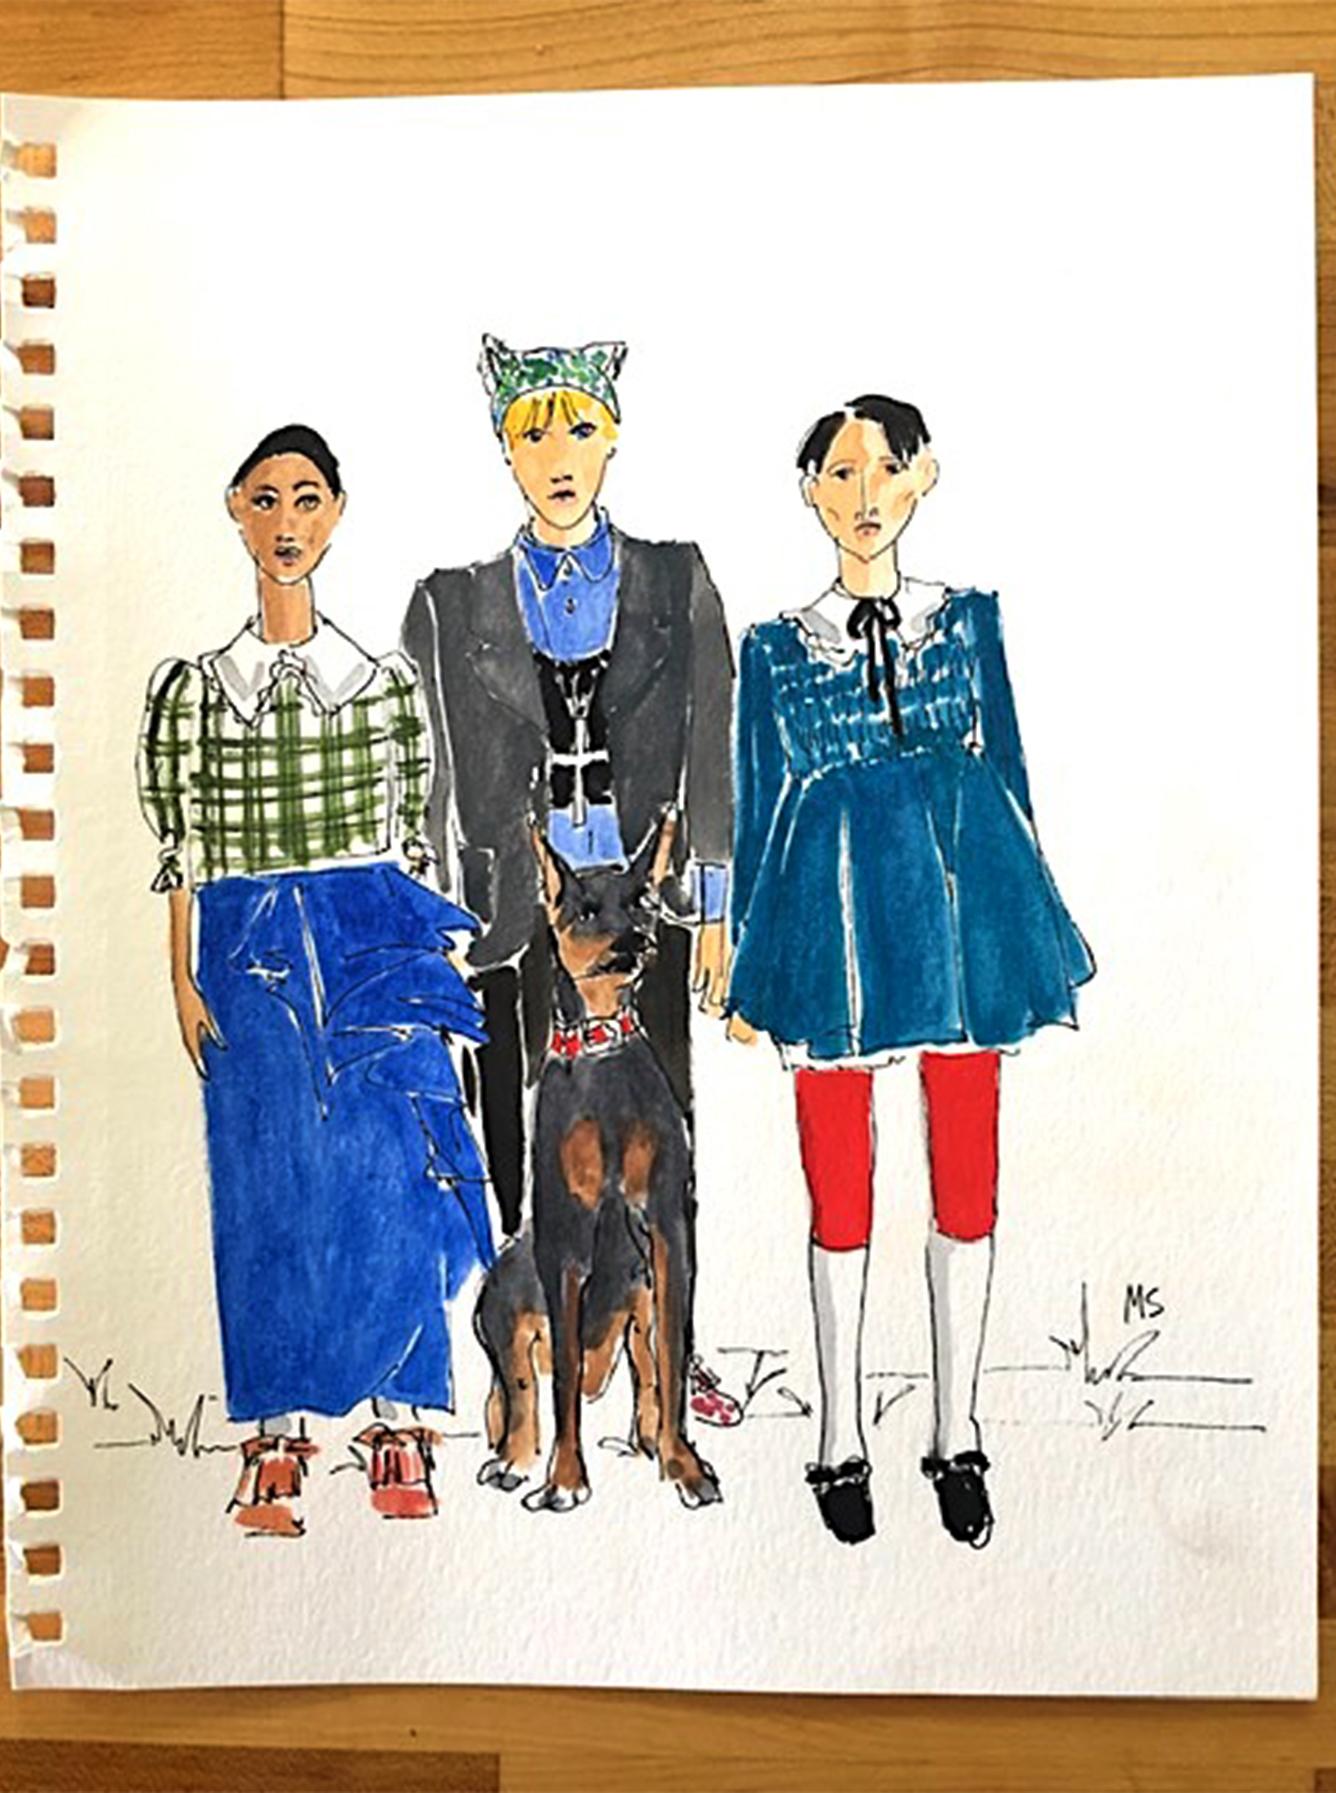 Gucci Fall, Fashion show models 2020. Watercolor fashion drawing on paper - Art by Manuel Santelices